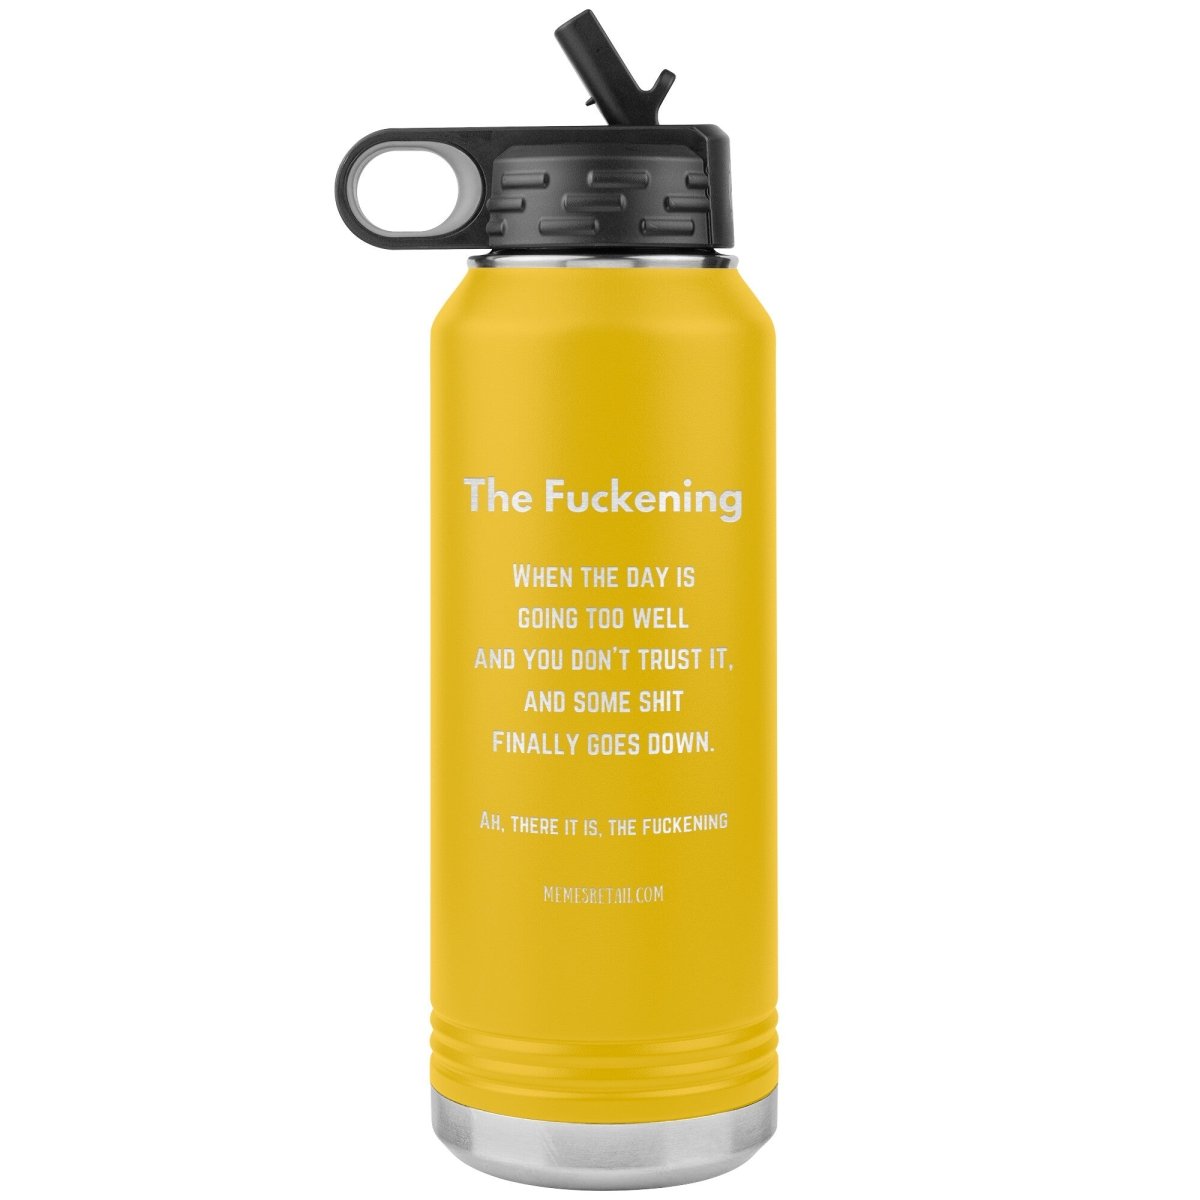 The Fuckening, When you don't trust the day. 32 oz Water Bottle, Yellow - MemesRetail.com